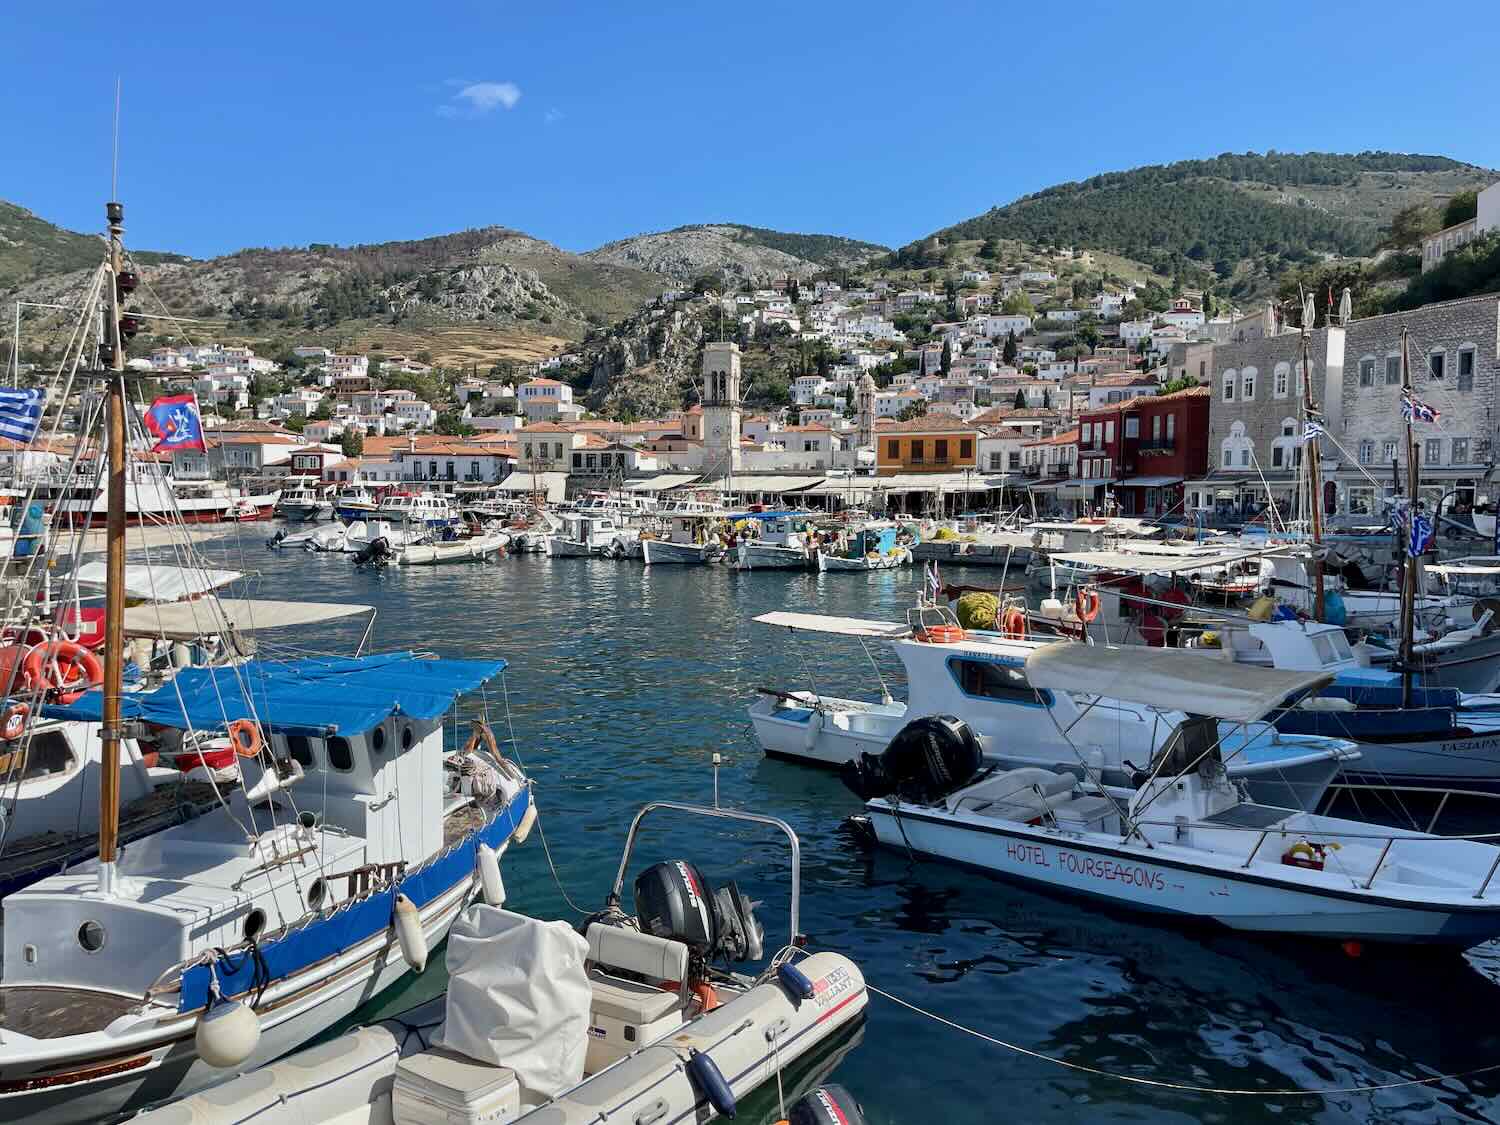 Bustling harbor of Hydra Island with boats docked in the blue waters, a charming and car-free day trip from Athens, reflecting true Greek island life.